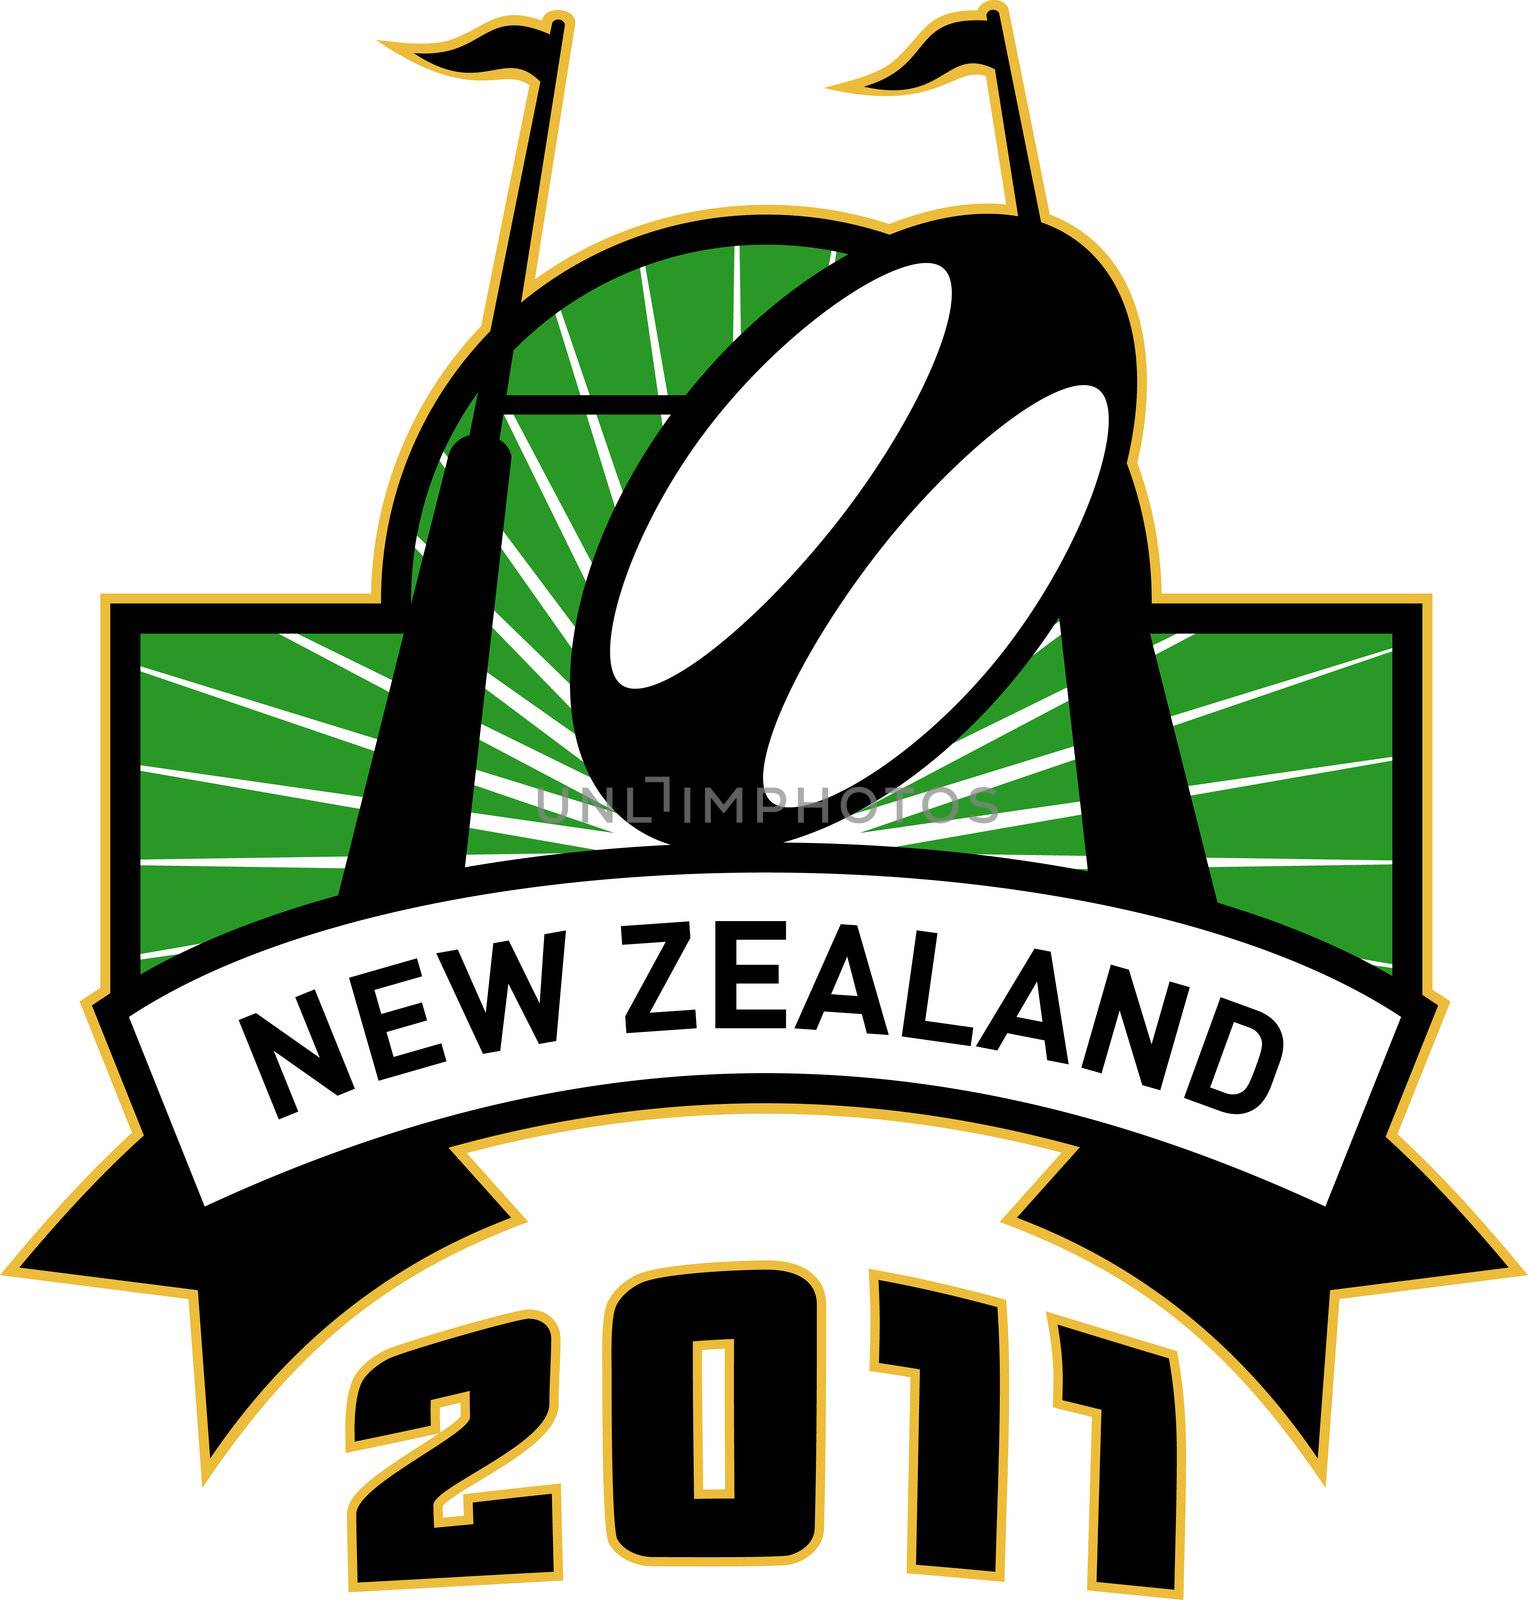 retro style illustration of a rugby ball and goal post inside rectangle with words new zealand 2011